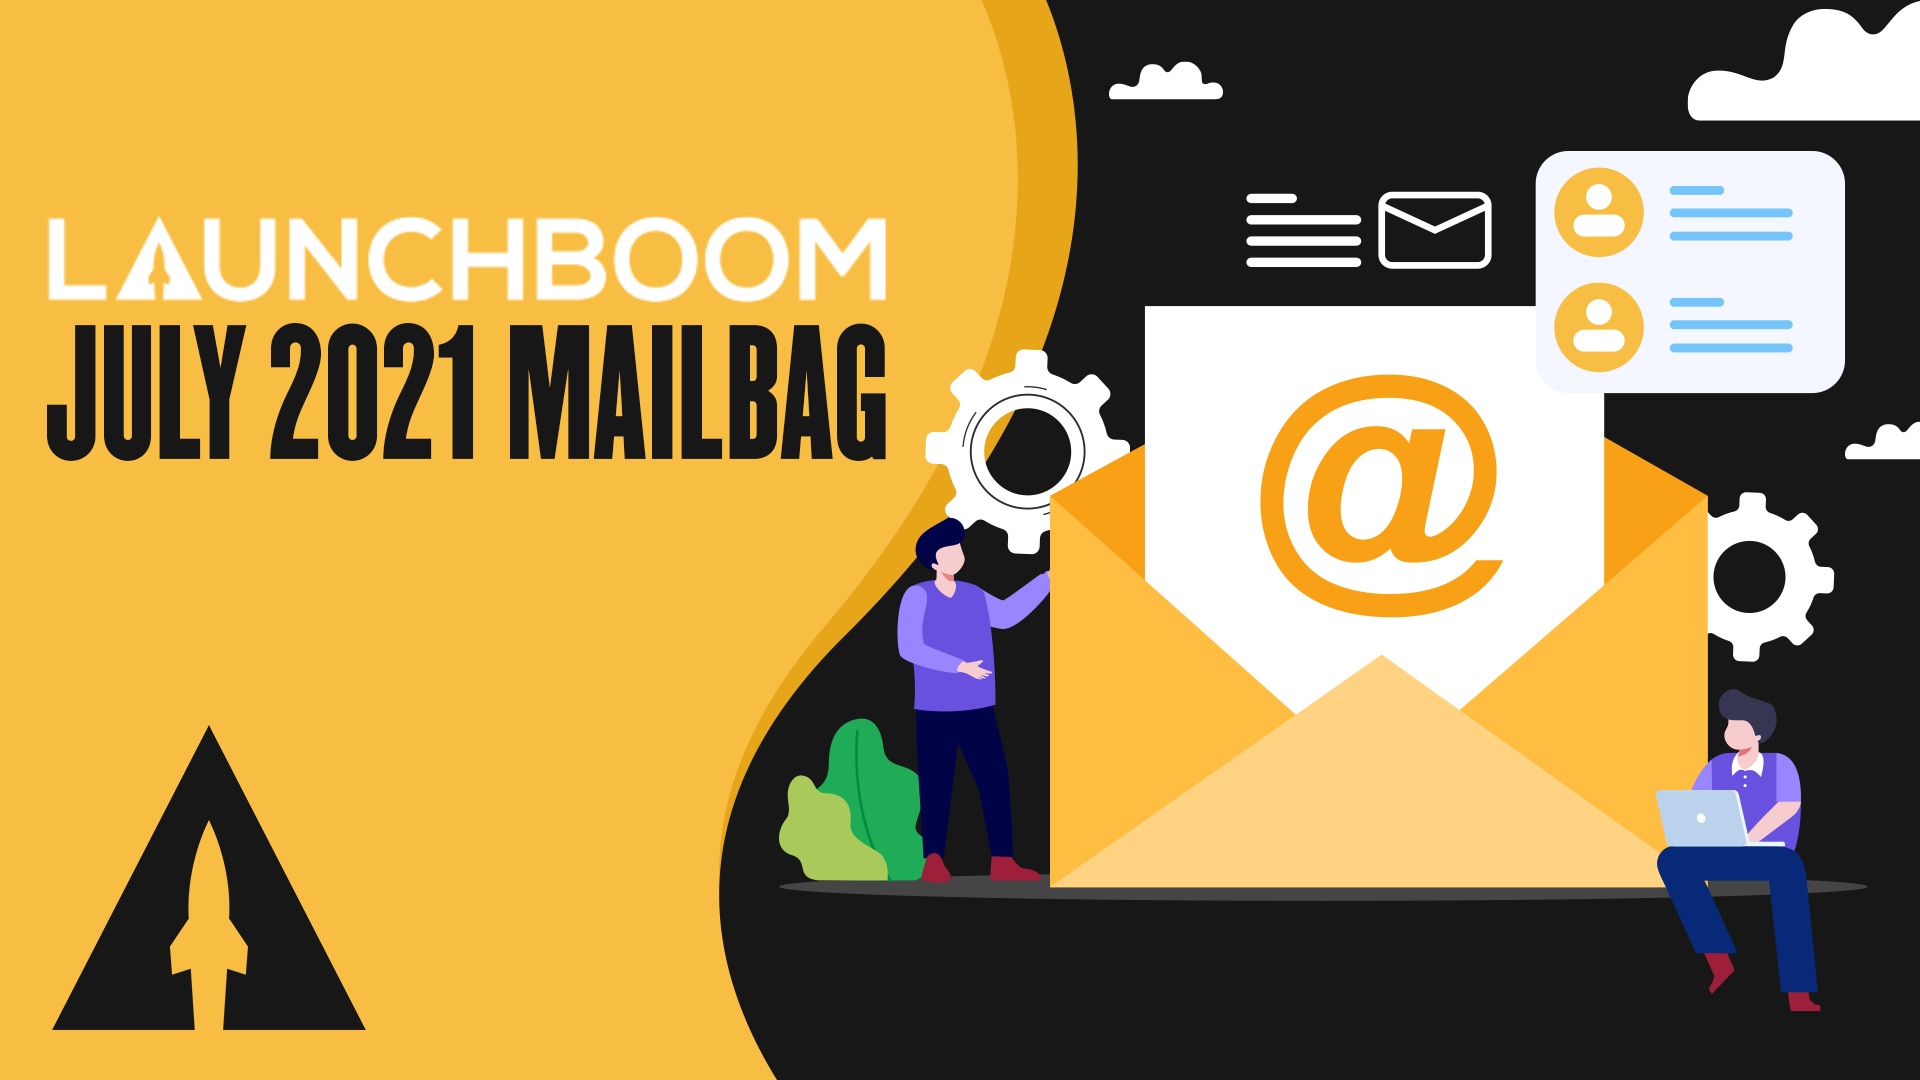 July 2021 LaunchBoom mailbag: crowdfunding publicity stunt, campaign video budgets, virtual games